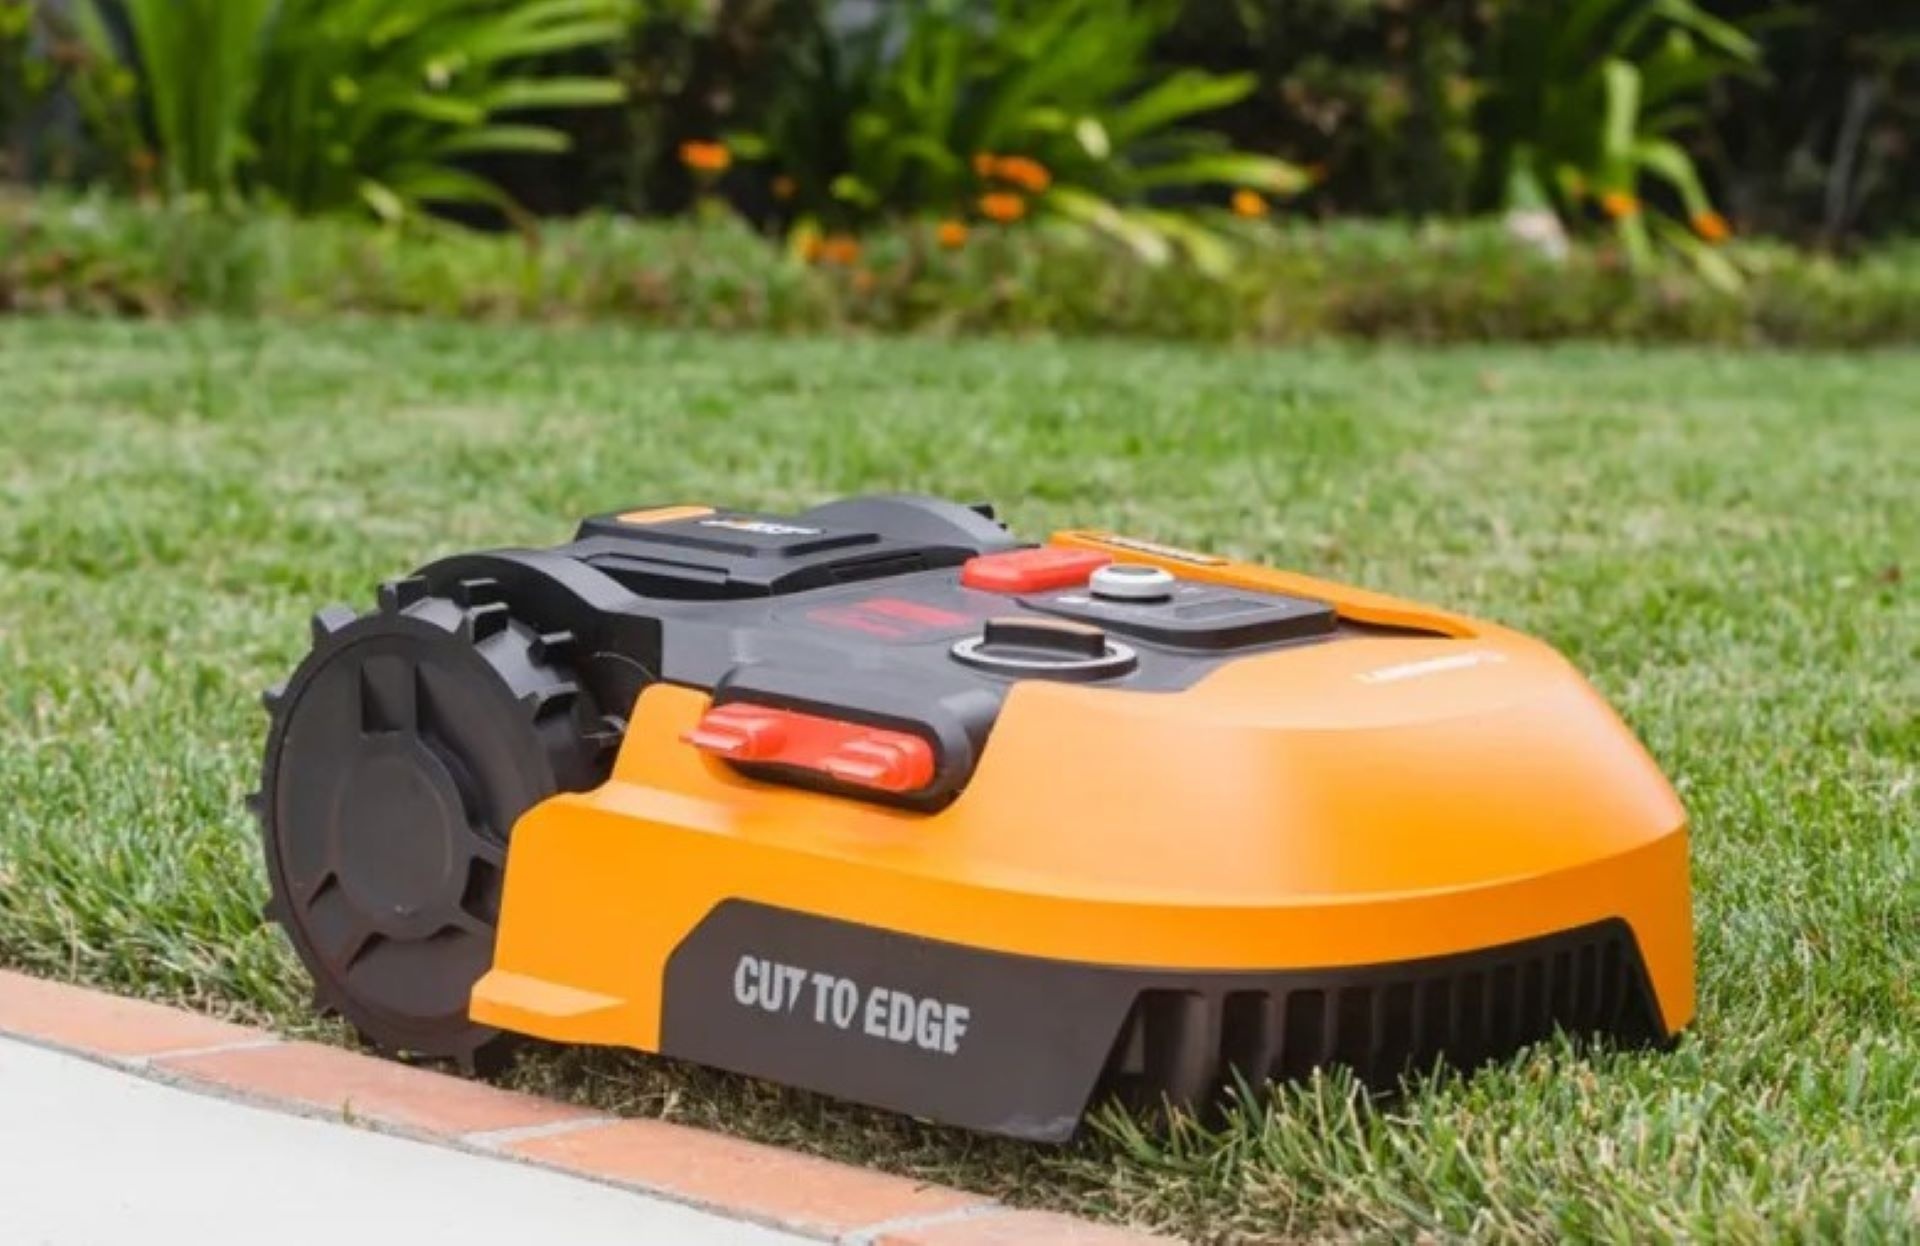 The Landroid mower is like a Roomba for your yard